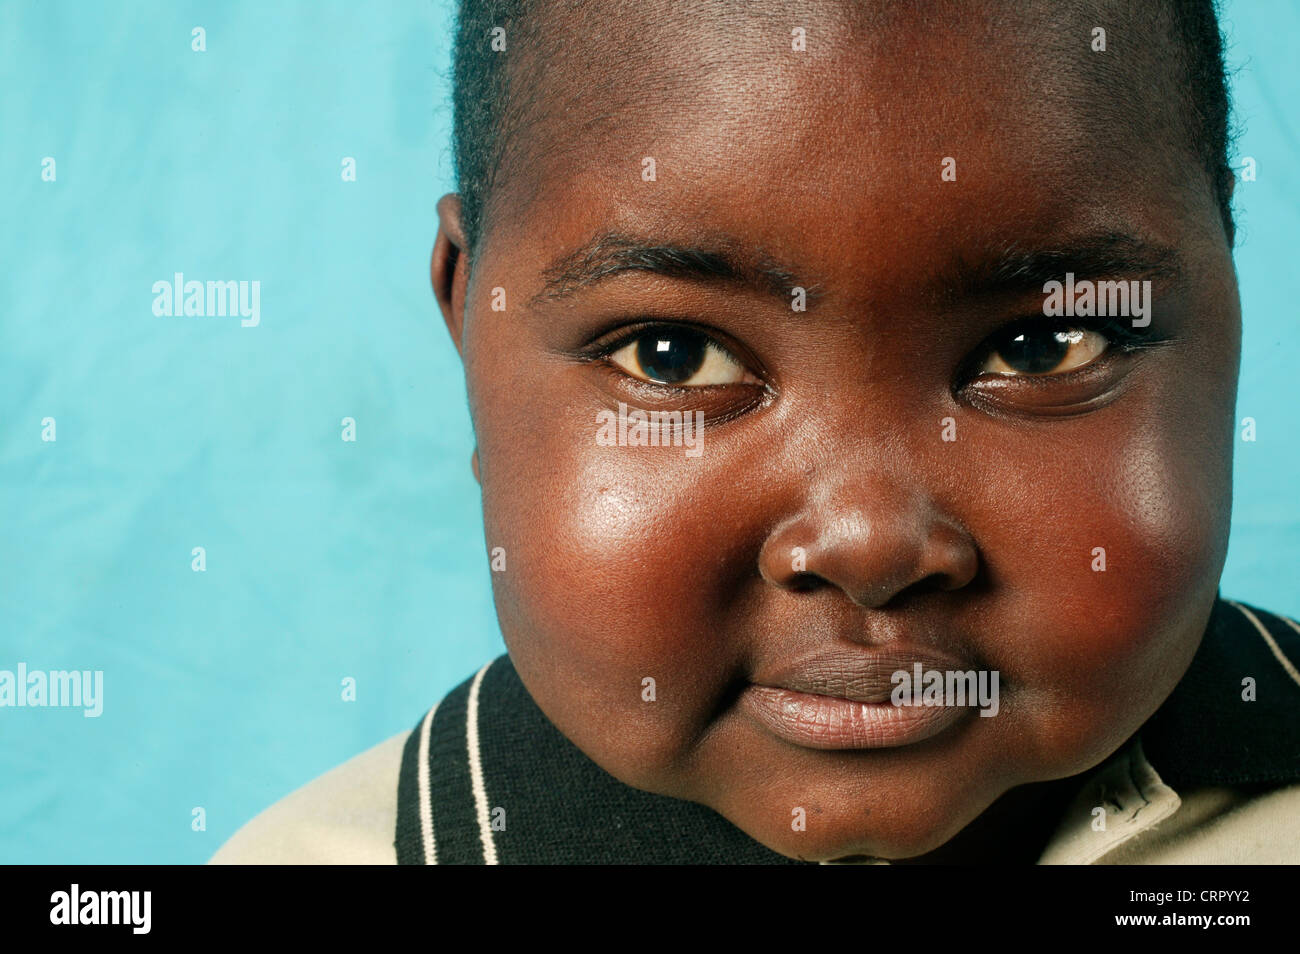 A child with Nephritic Syndrome Stock Photo